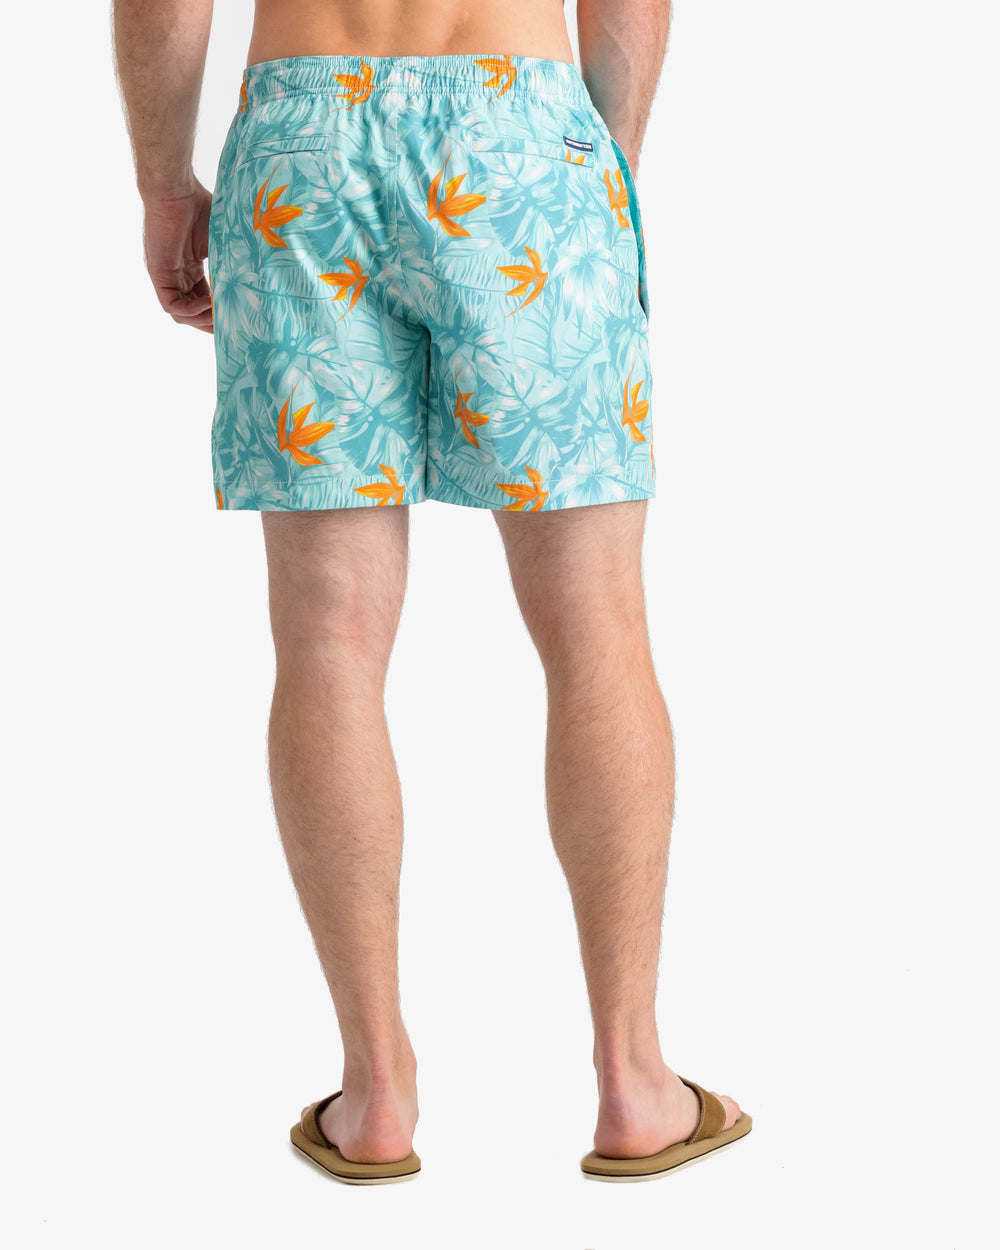 The back view of the Southern Tide Monstera Palm Swim Trunk by Southern Tide - Baltic Teal